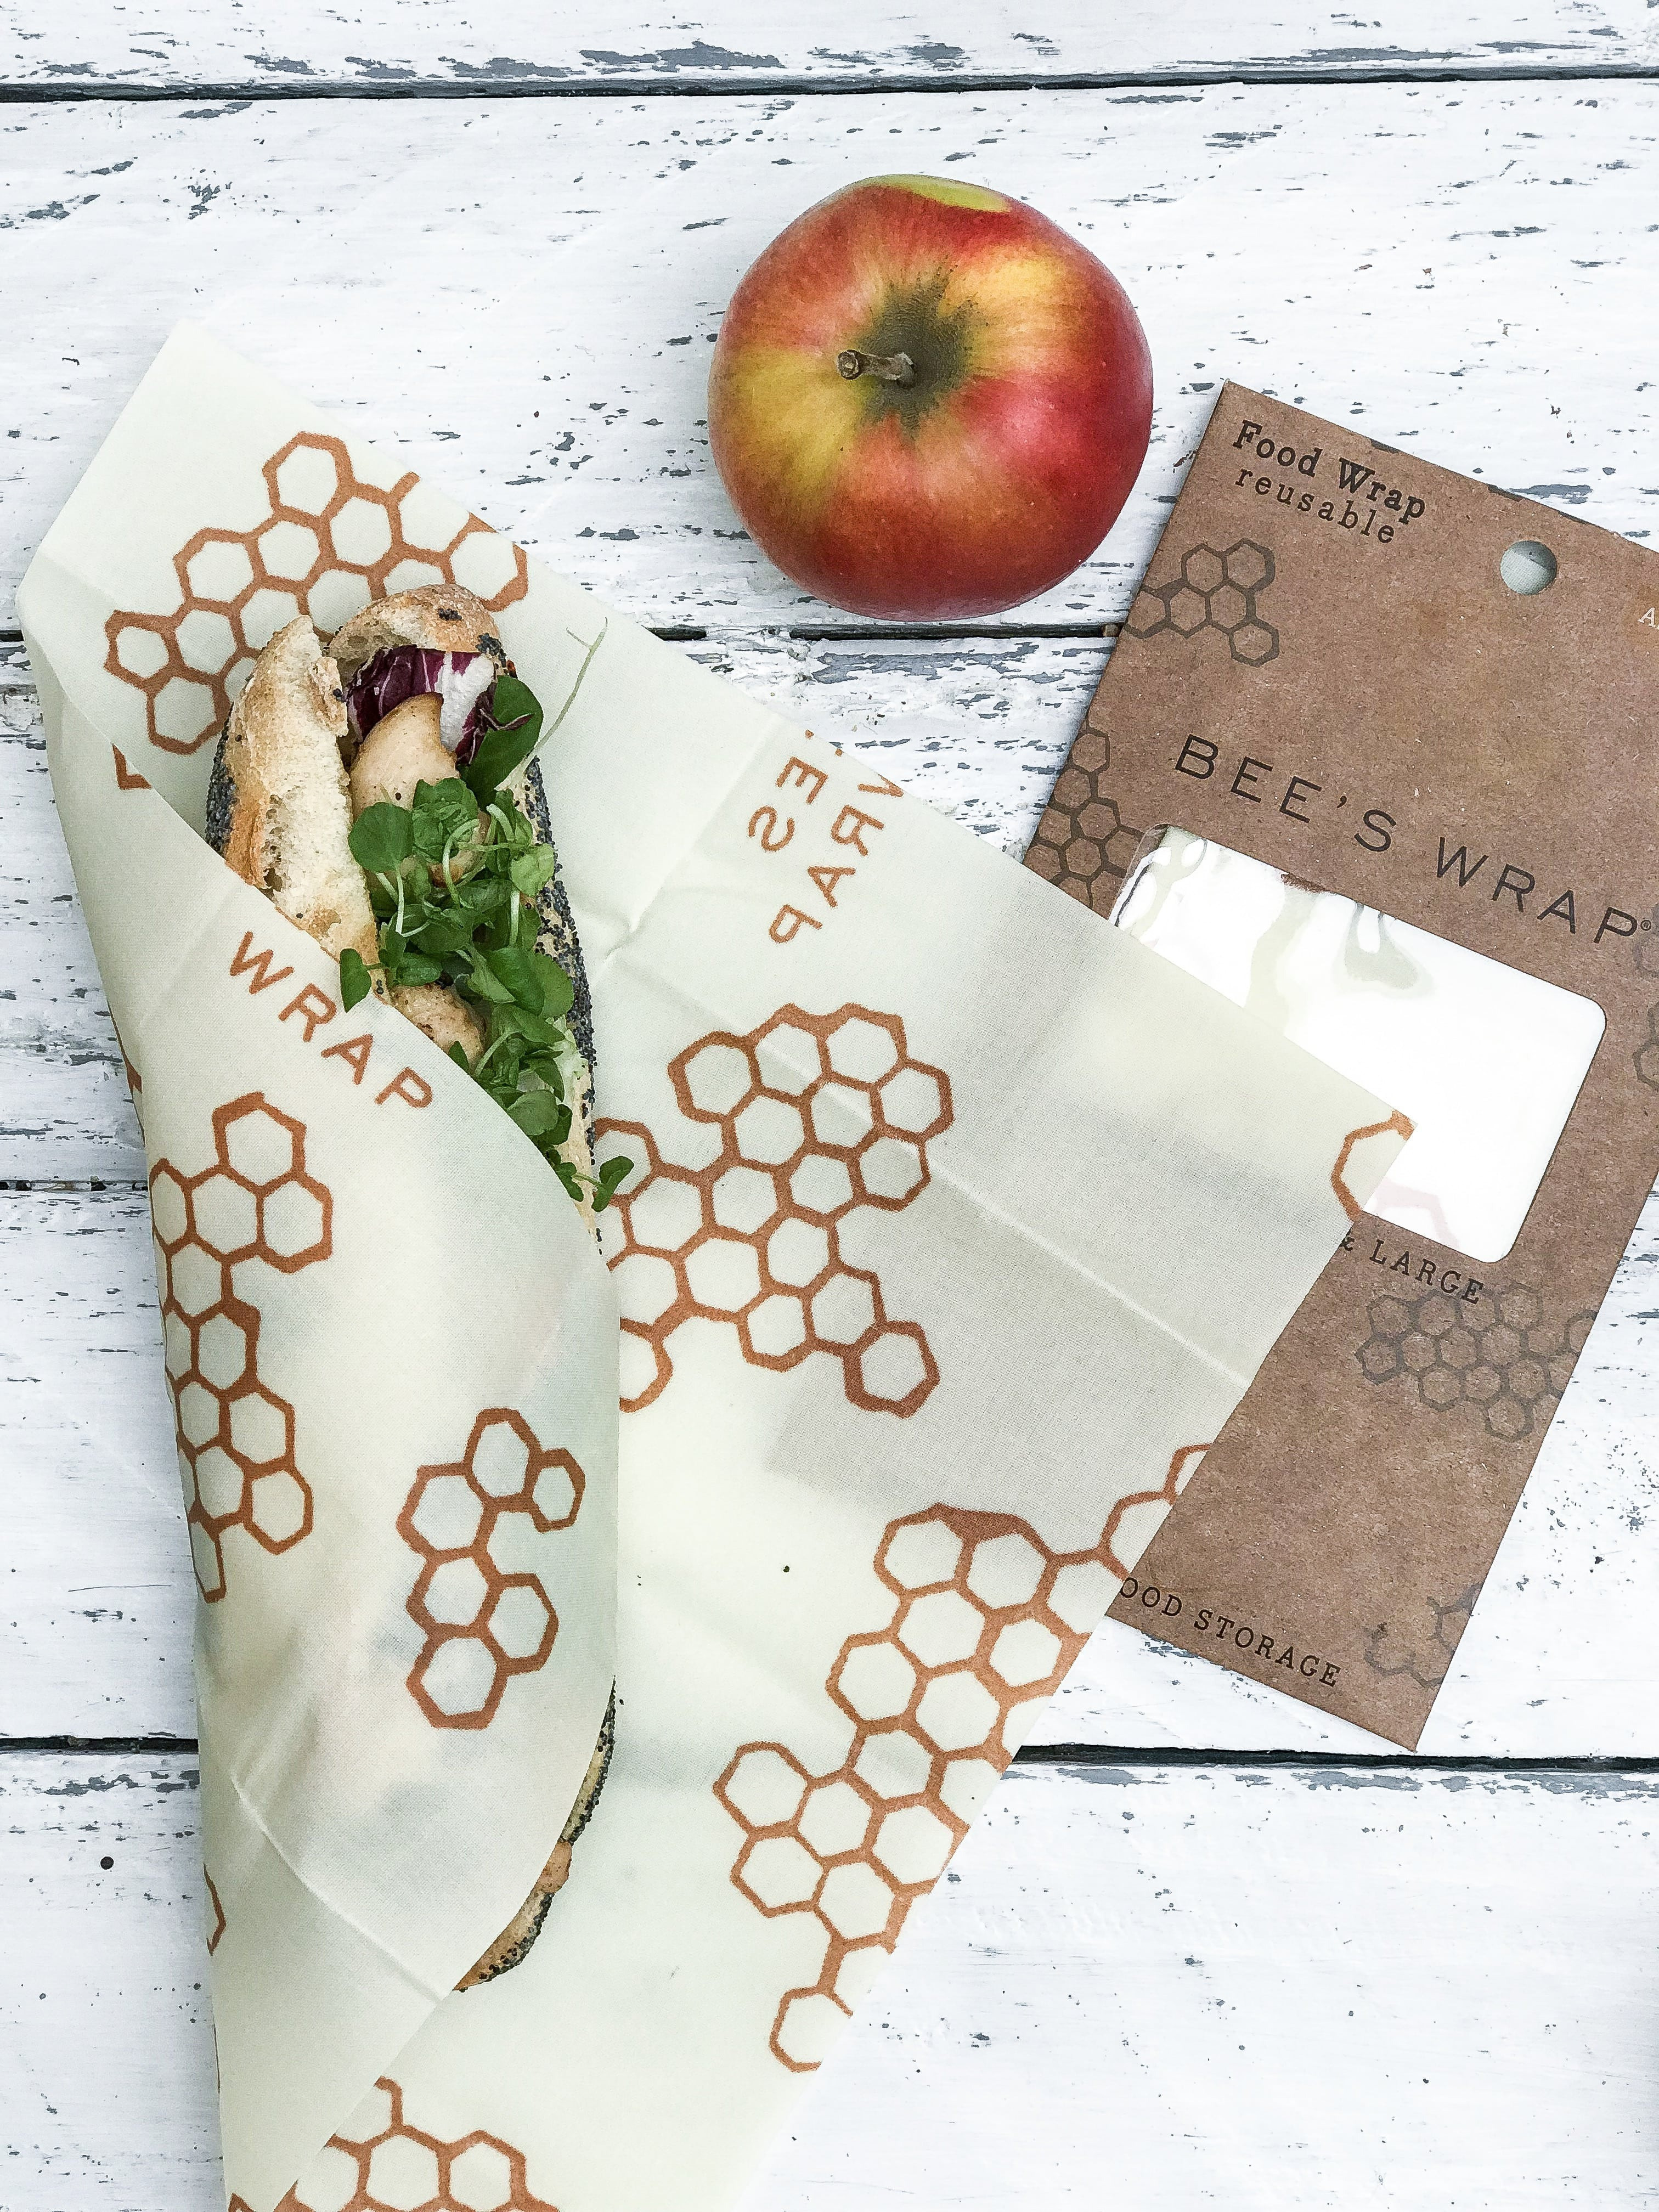 Bee's Wrap Emballage alimentaire Pack 3 tailles